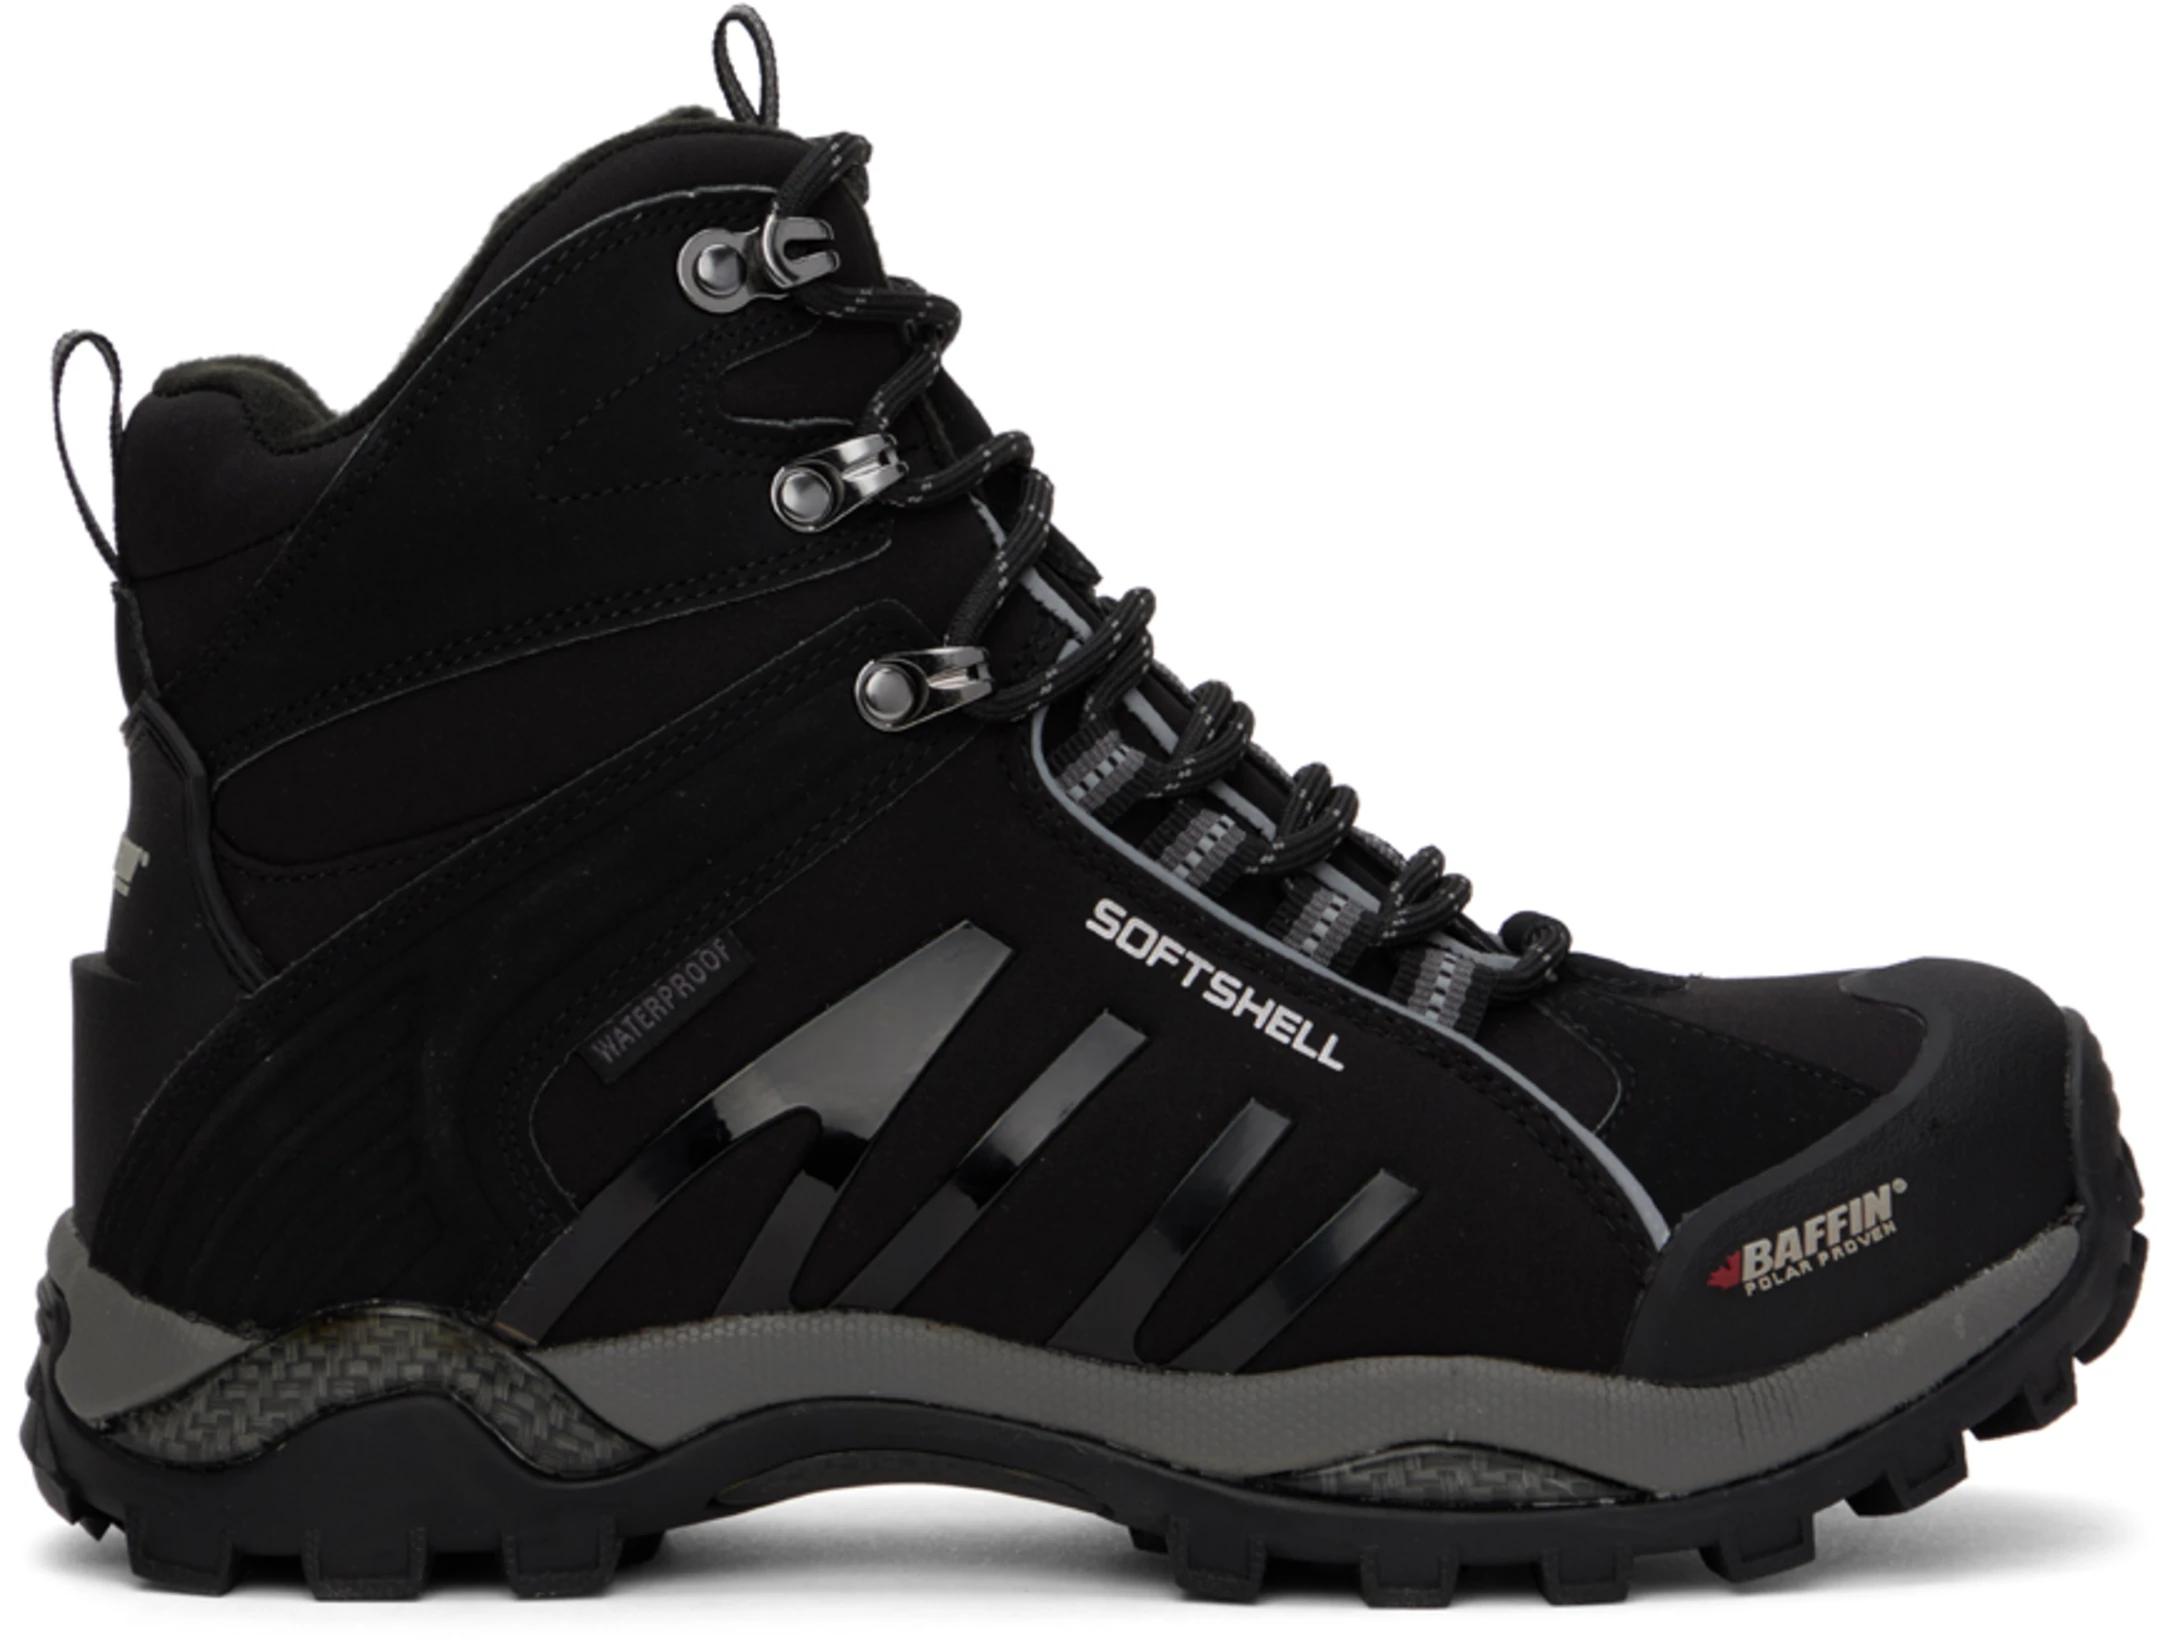 Black Zone Boots by BAFFIN